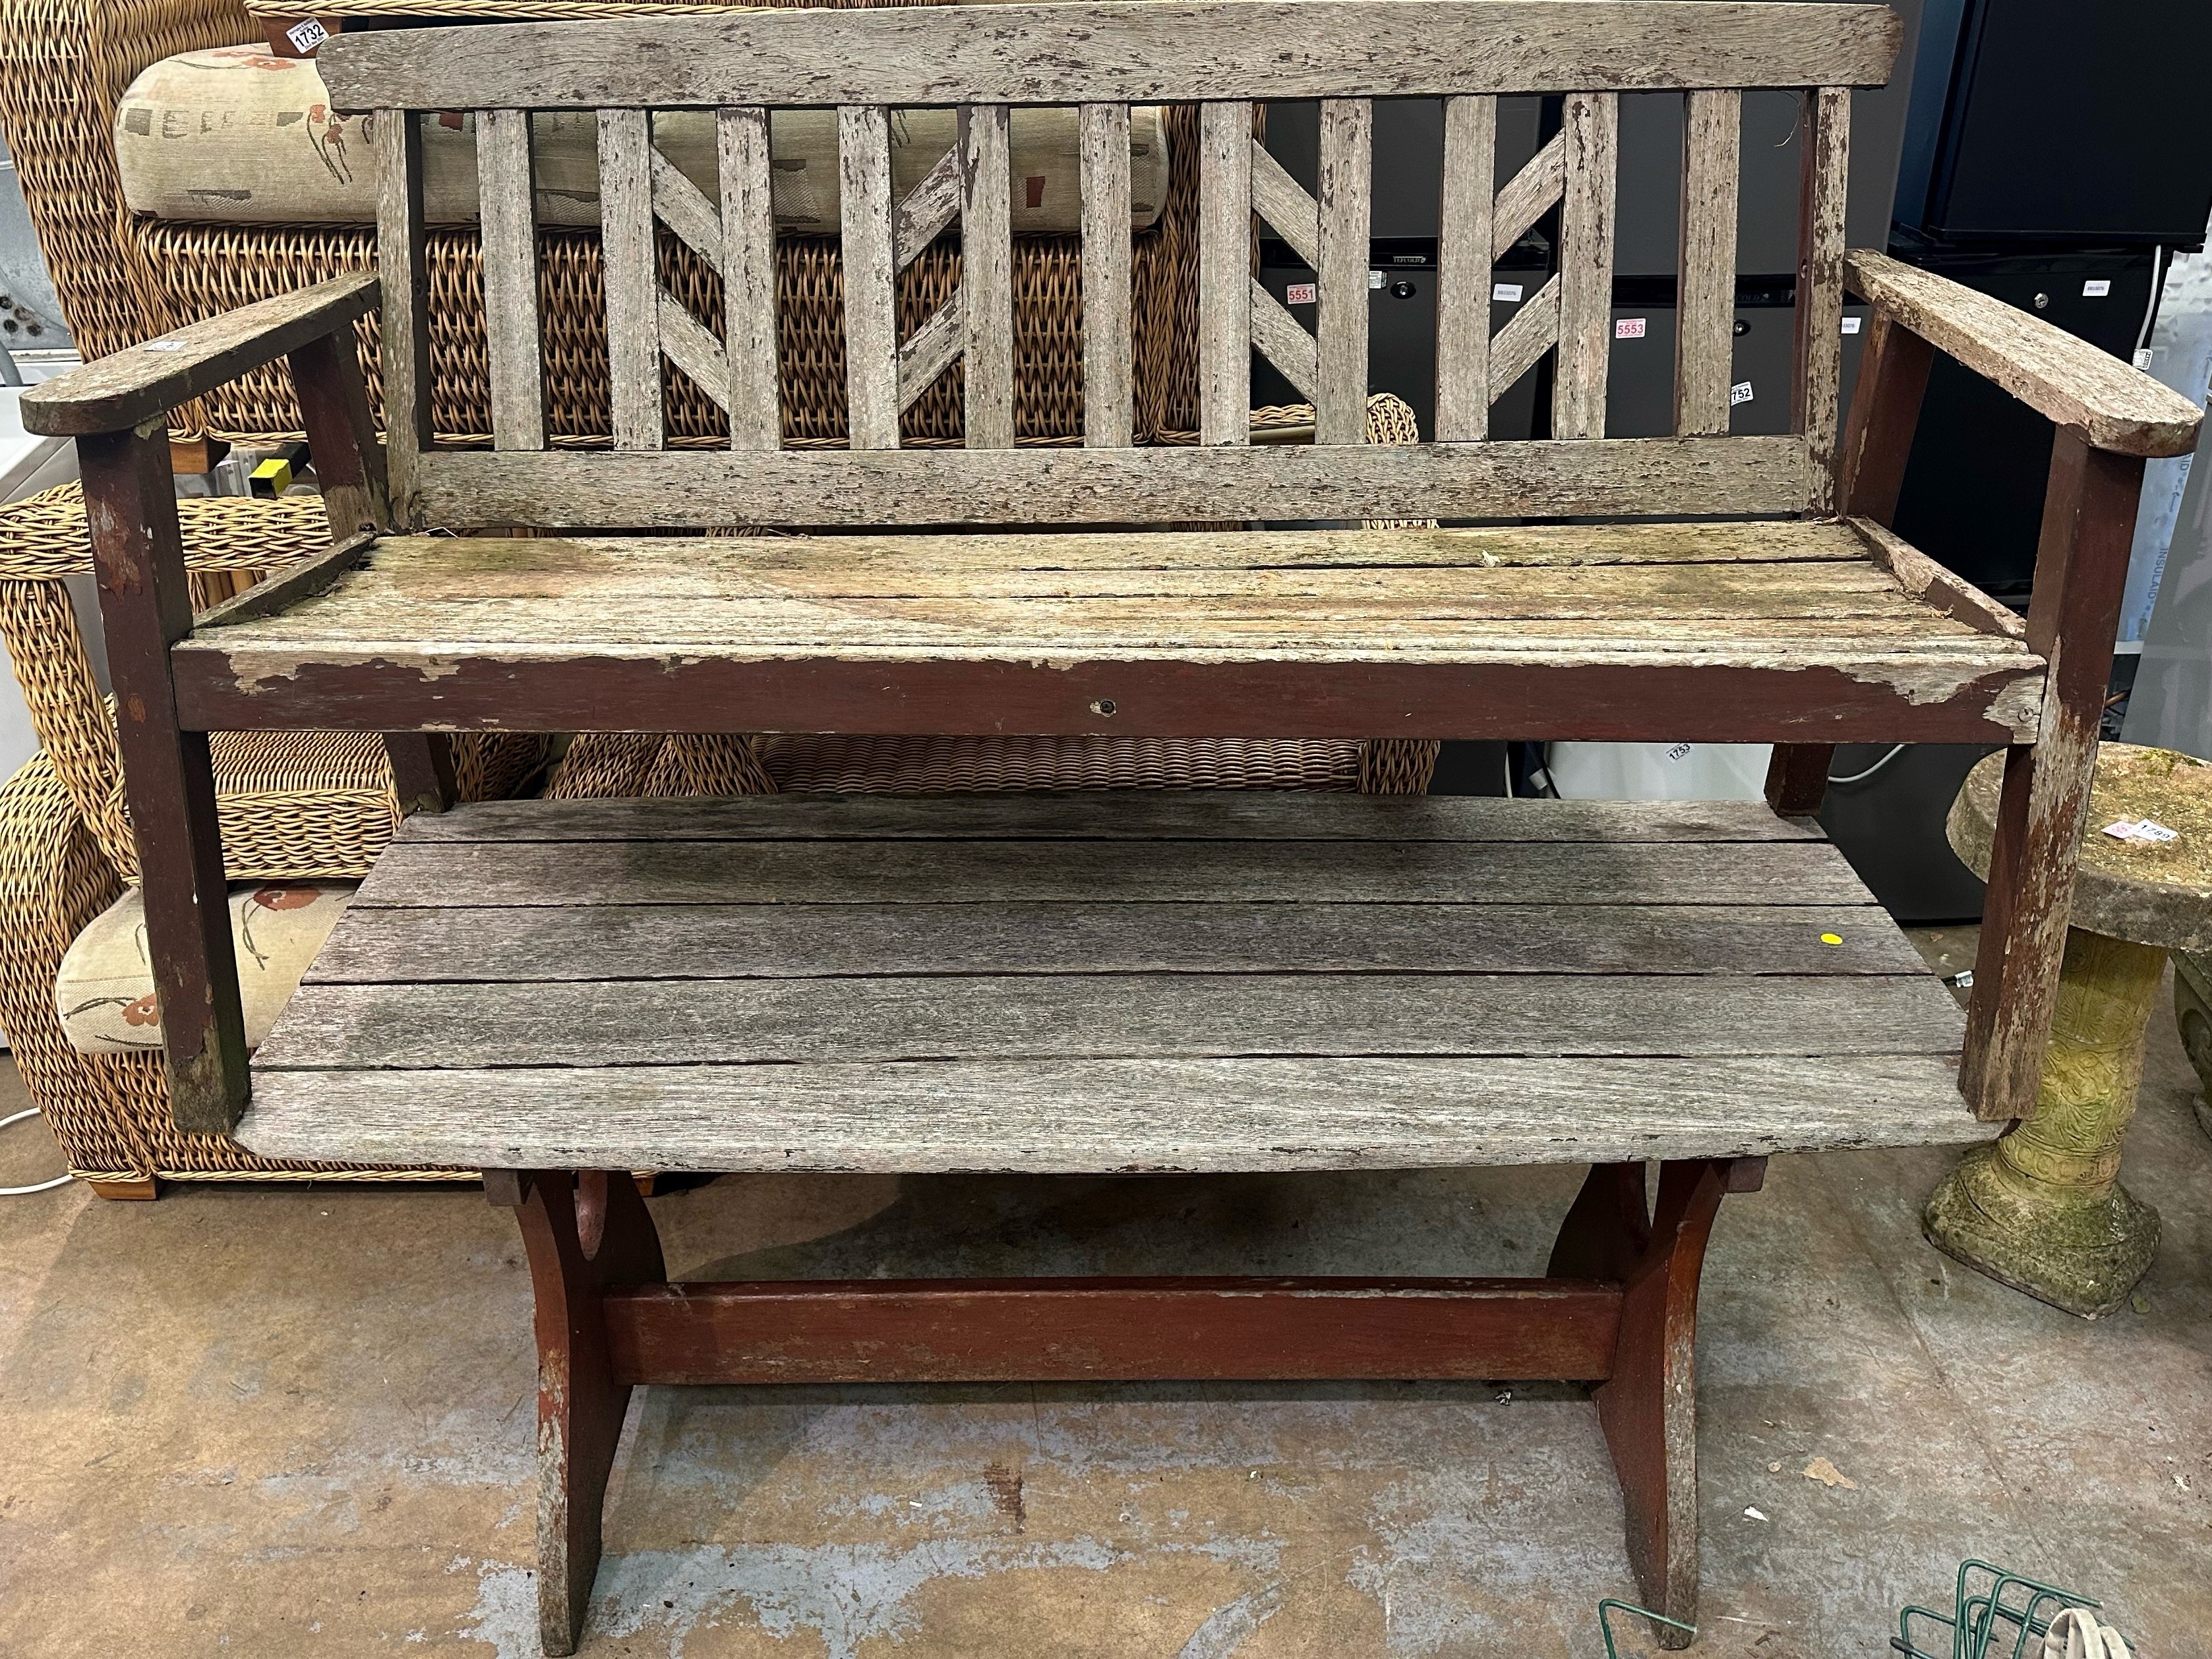 Garden bench and table. Not available for in-house P&P